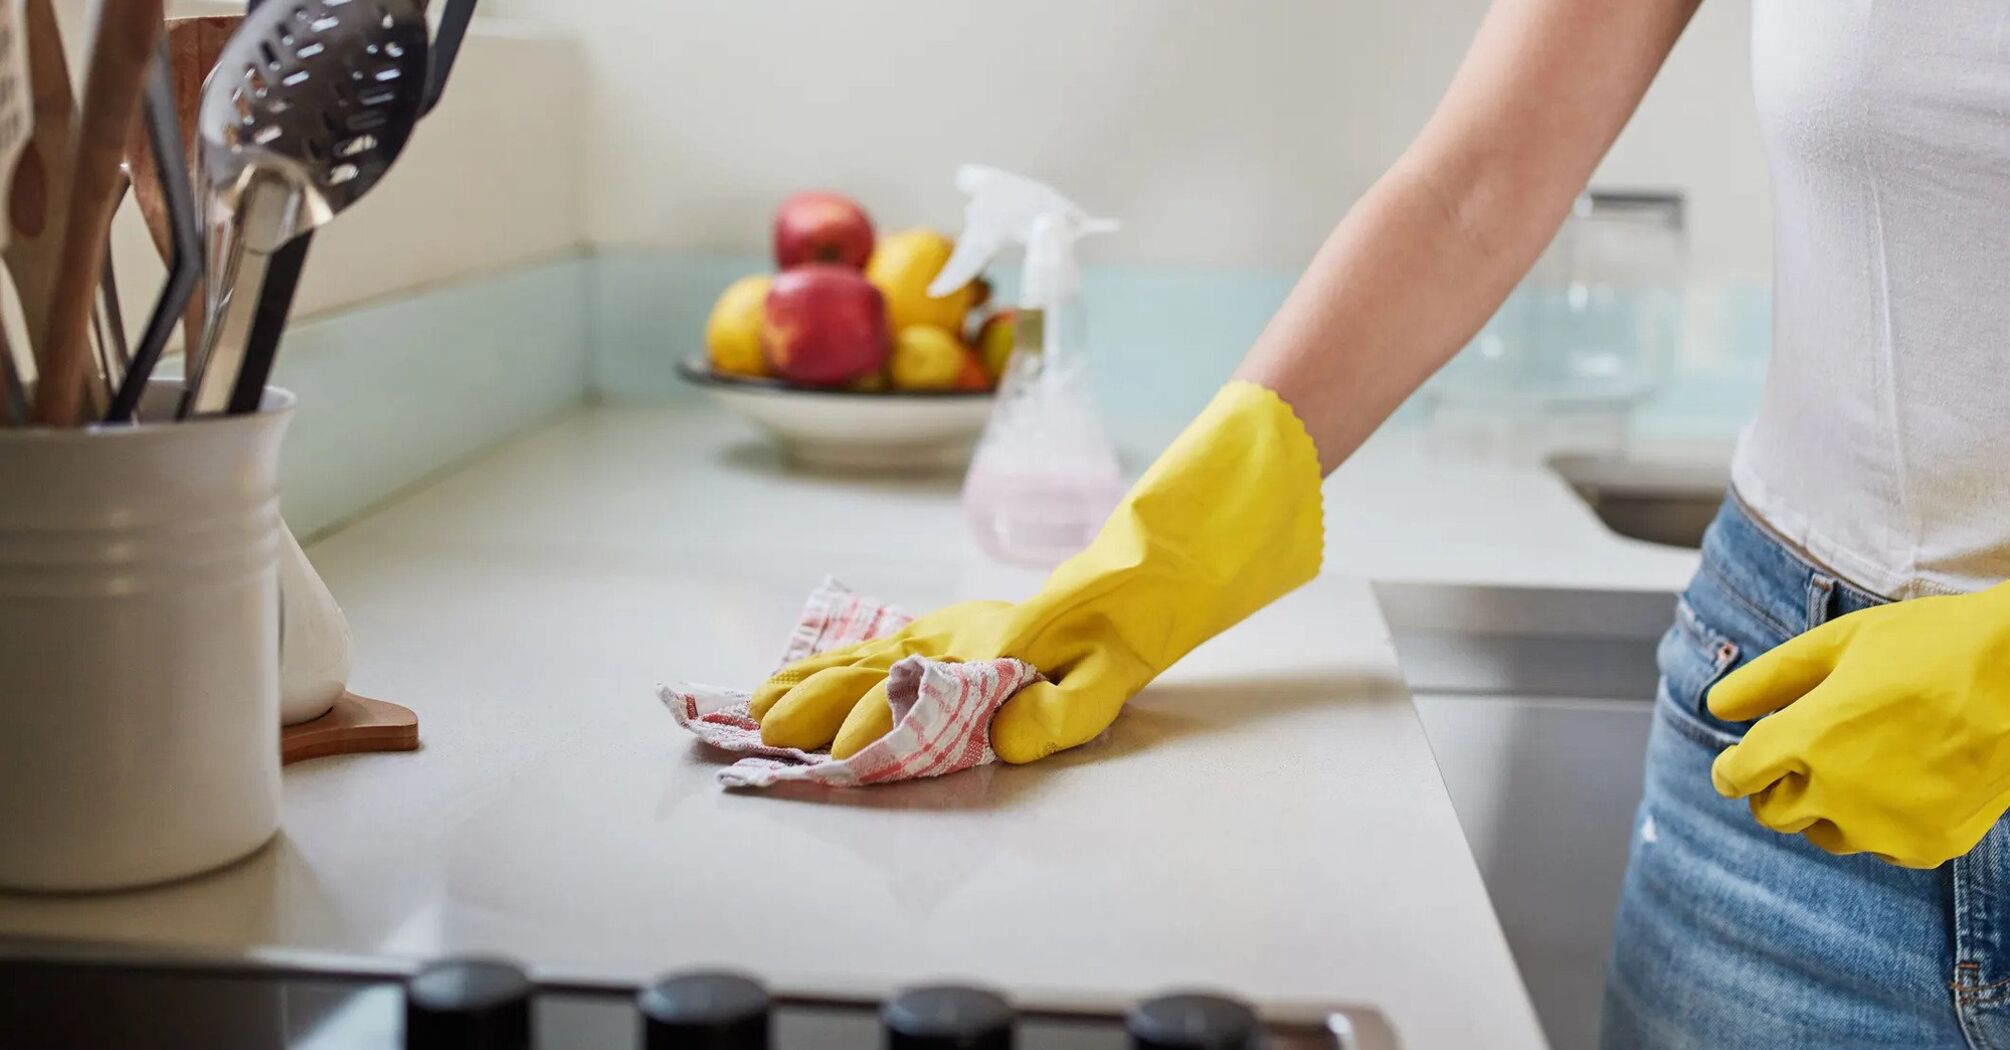 How to tidy up the kitchen